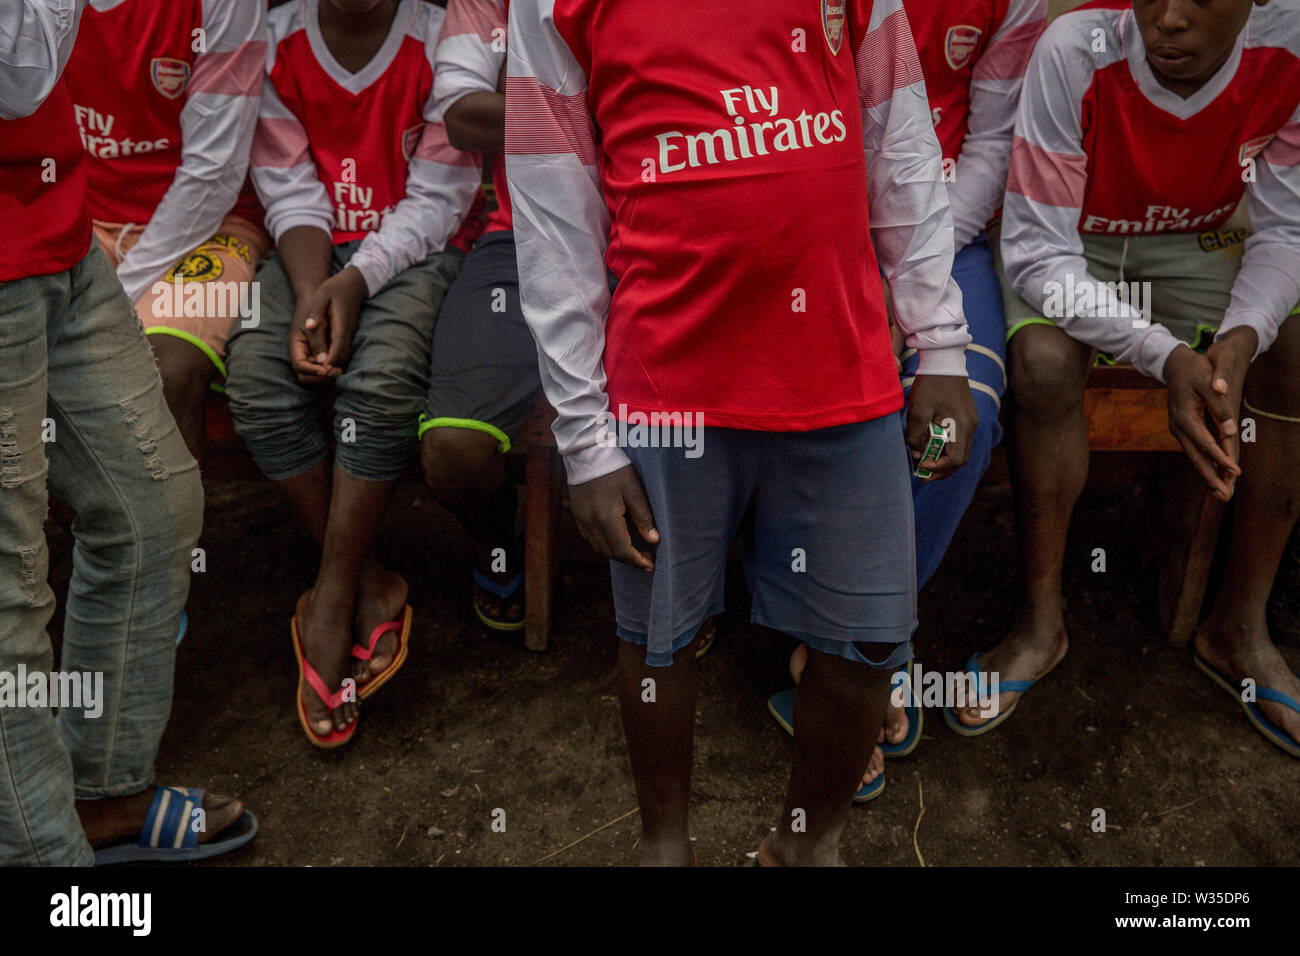 Former child soldiers pose for a photo dressed in Arsenal Fly Emirates jerseys at a Transit Centre in Goma. Hundreds will spend several months here before being reintegrated into the community. UNICEF is working with MONUSCO (UN DRC stabilization mission) to support some of the tens of thousands of child soldiers that have been recruited in eastern DRC since 2013. Stock Photo